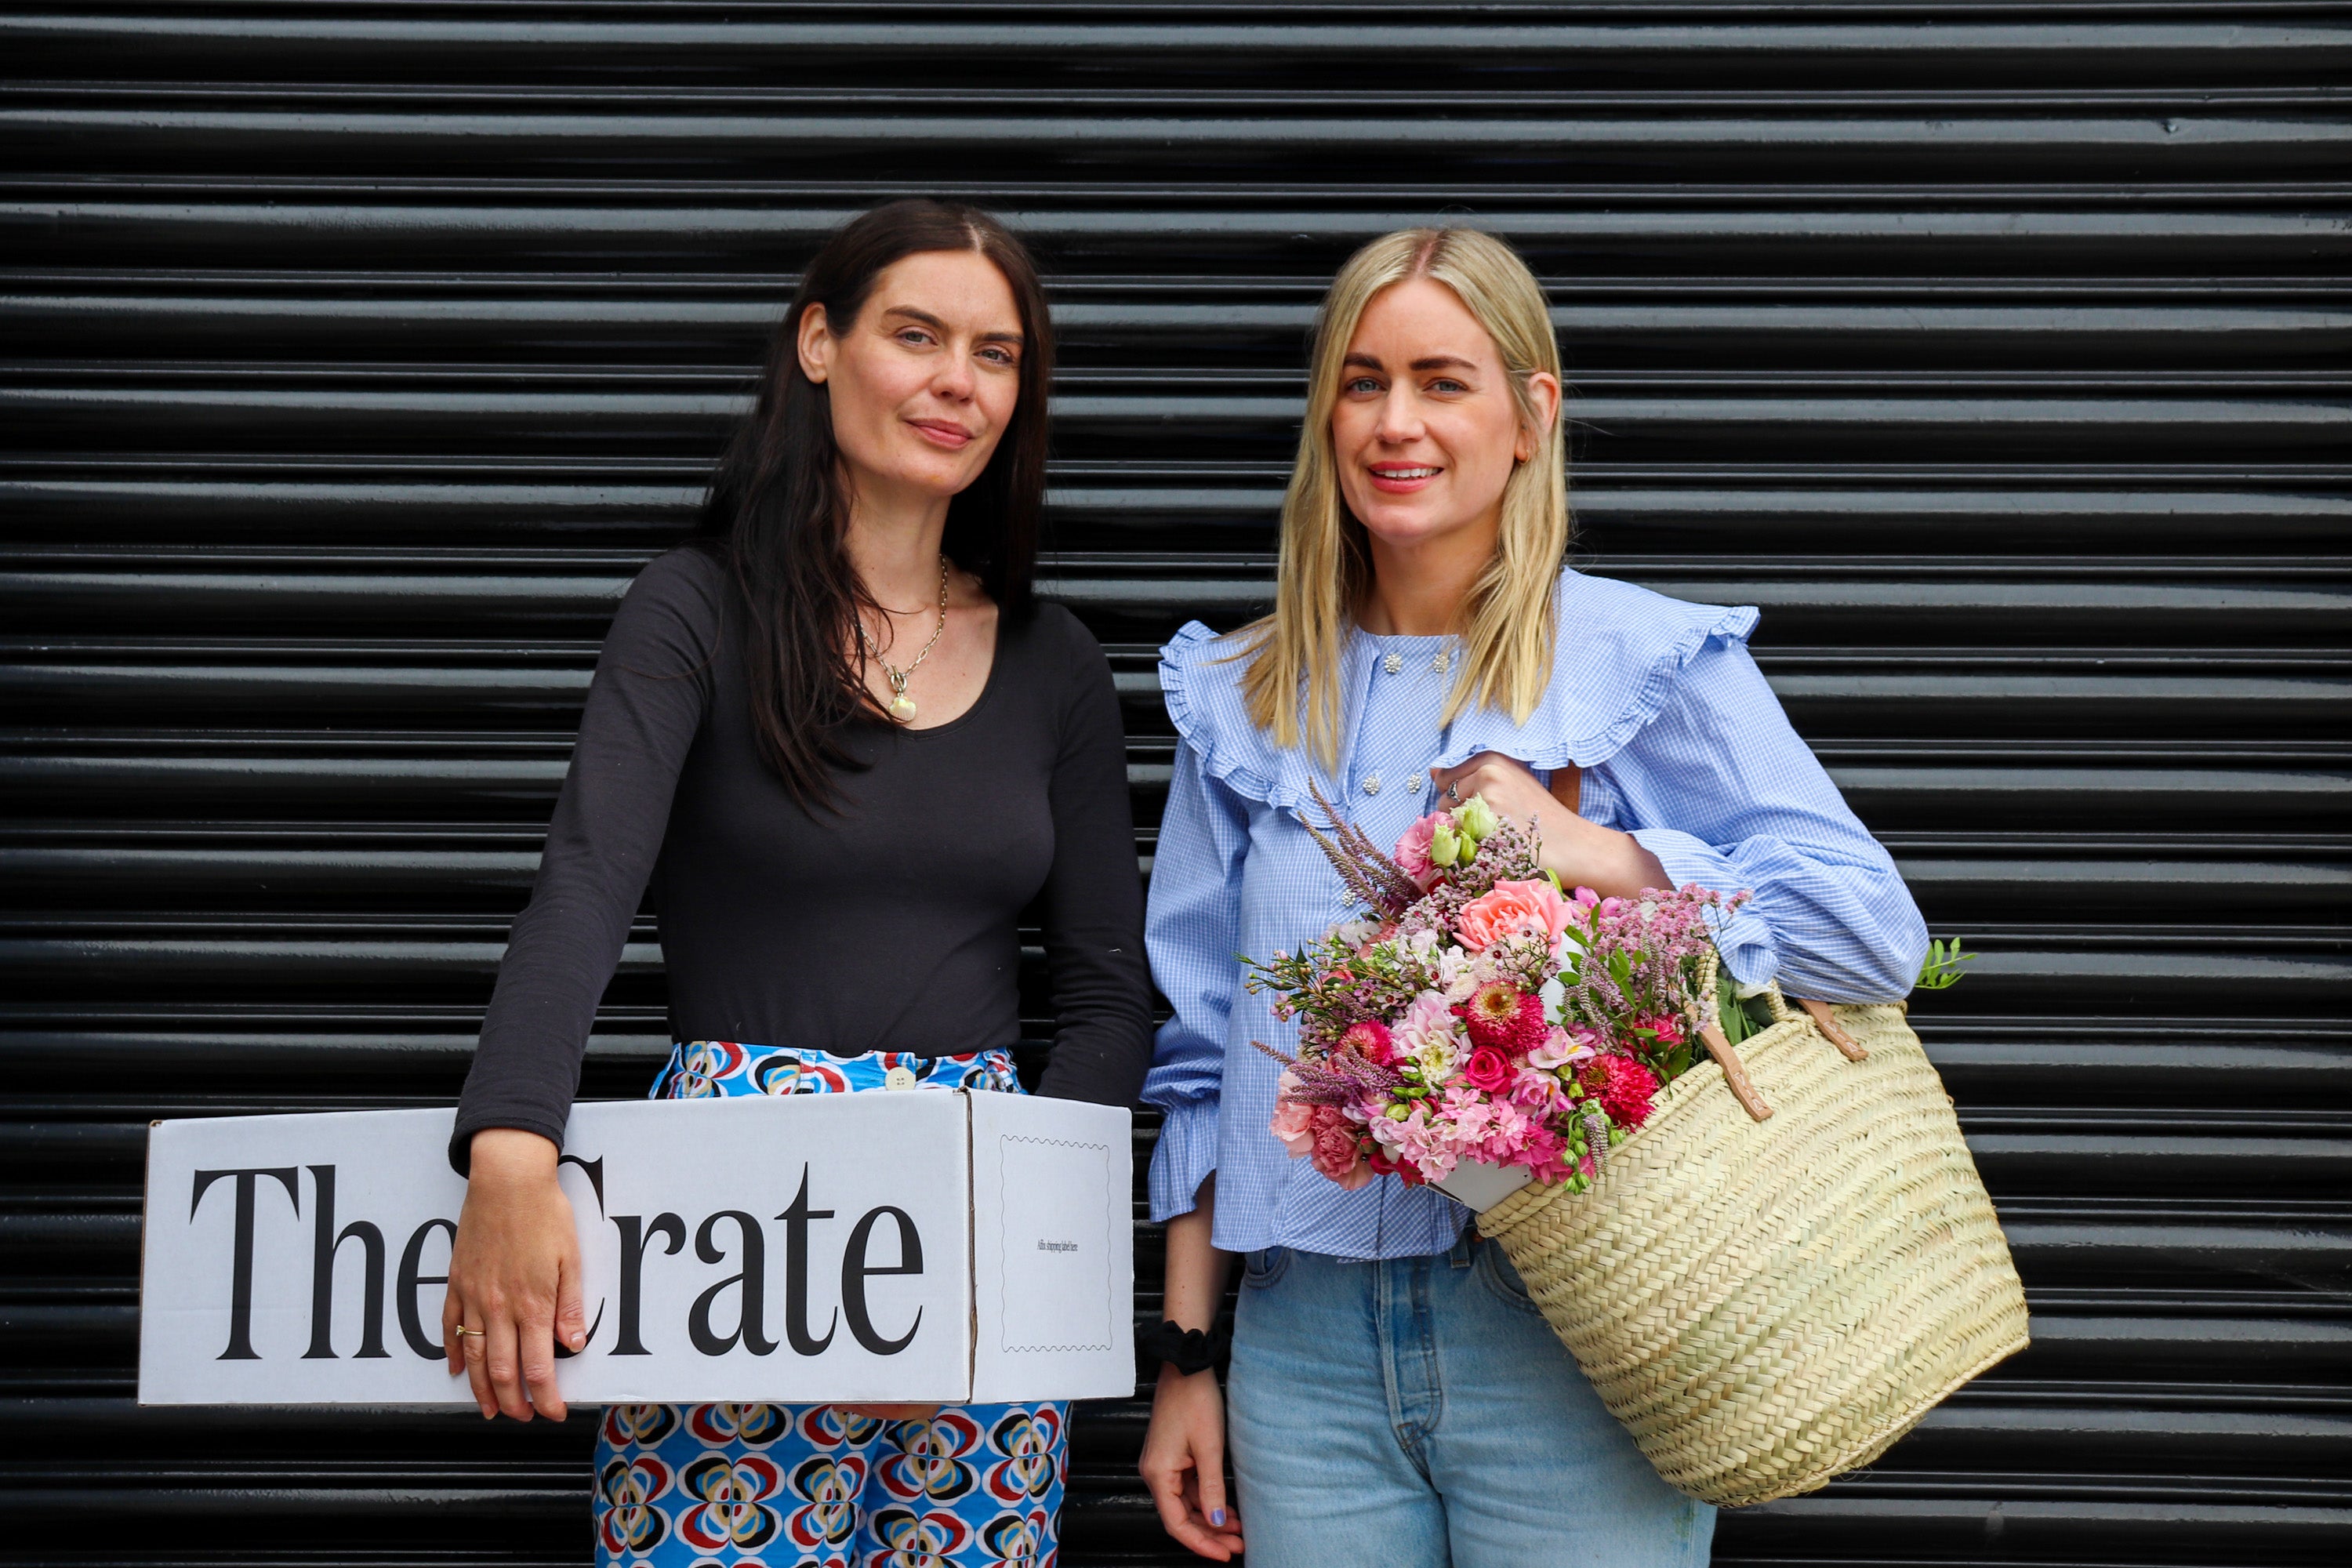 Flower box and founders of The Crate